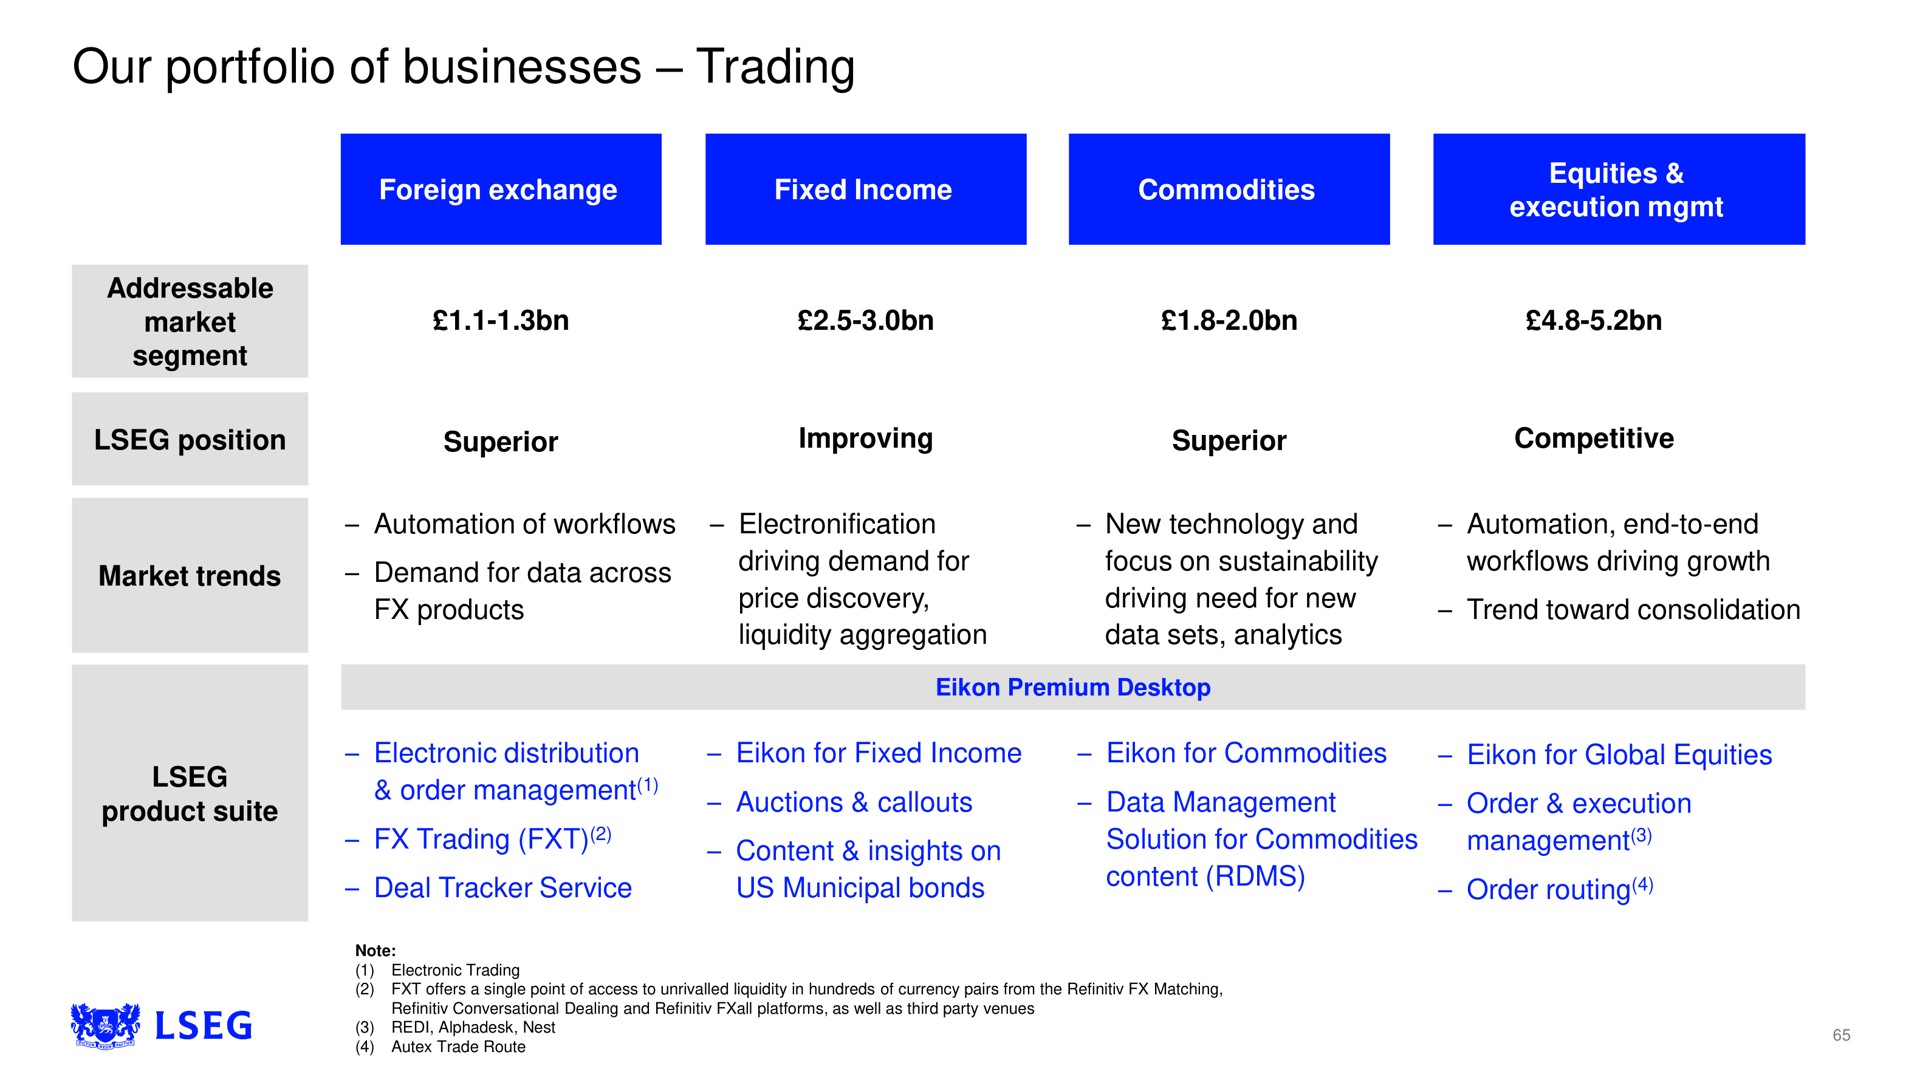 our portfolio of businesses trading | LSE